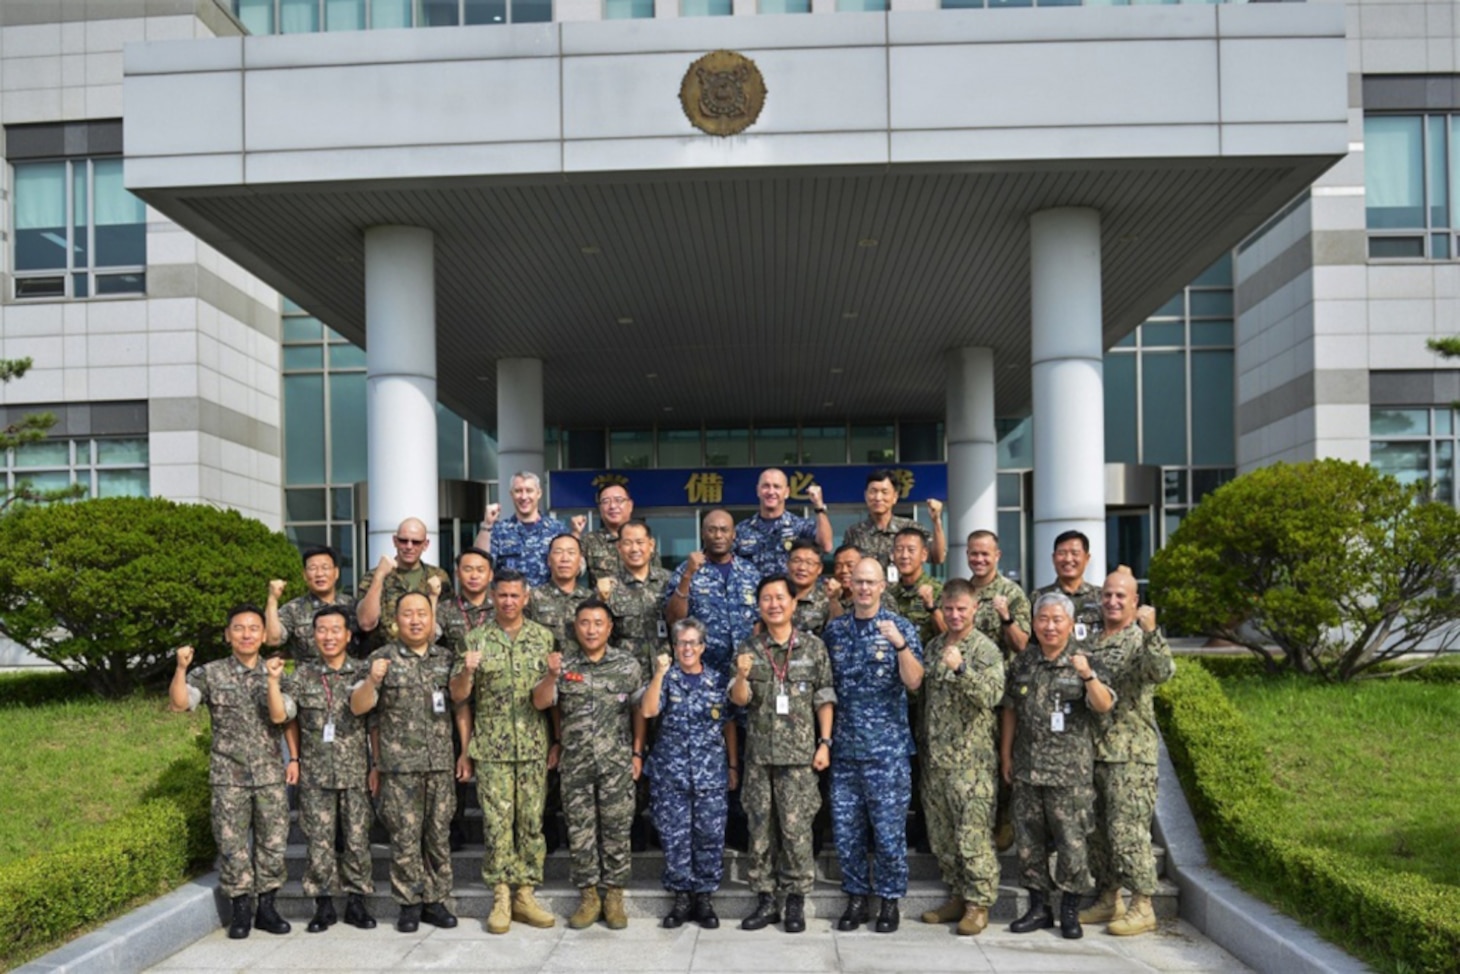 (July 22, 2016) - U.S. and Republic of Korea (ROK) senior enlisted leaders held a Combined Joint Senior Enlisted Leaders Symposium on the ROK Fleet Base in Busan, the new home for Commander, U.S. Naval Forces Korea. Commander, Naval Forces Korea is the U.S. Navy's representative in the Republic of Korea, strengthening collective security efforts in the region.